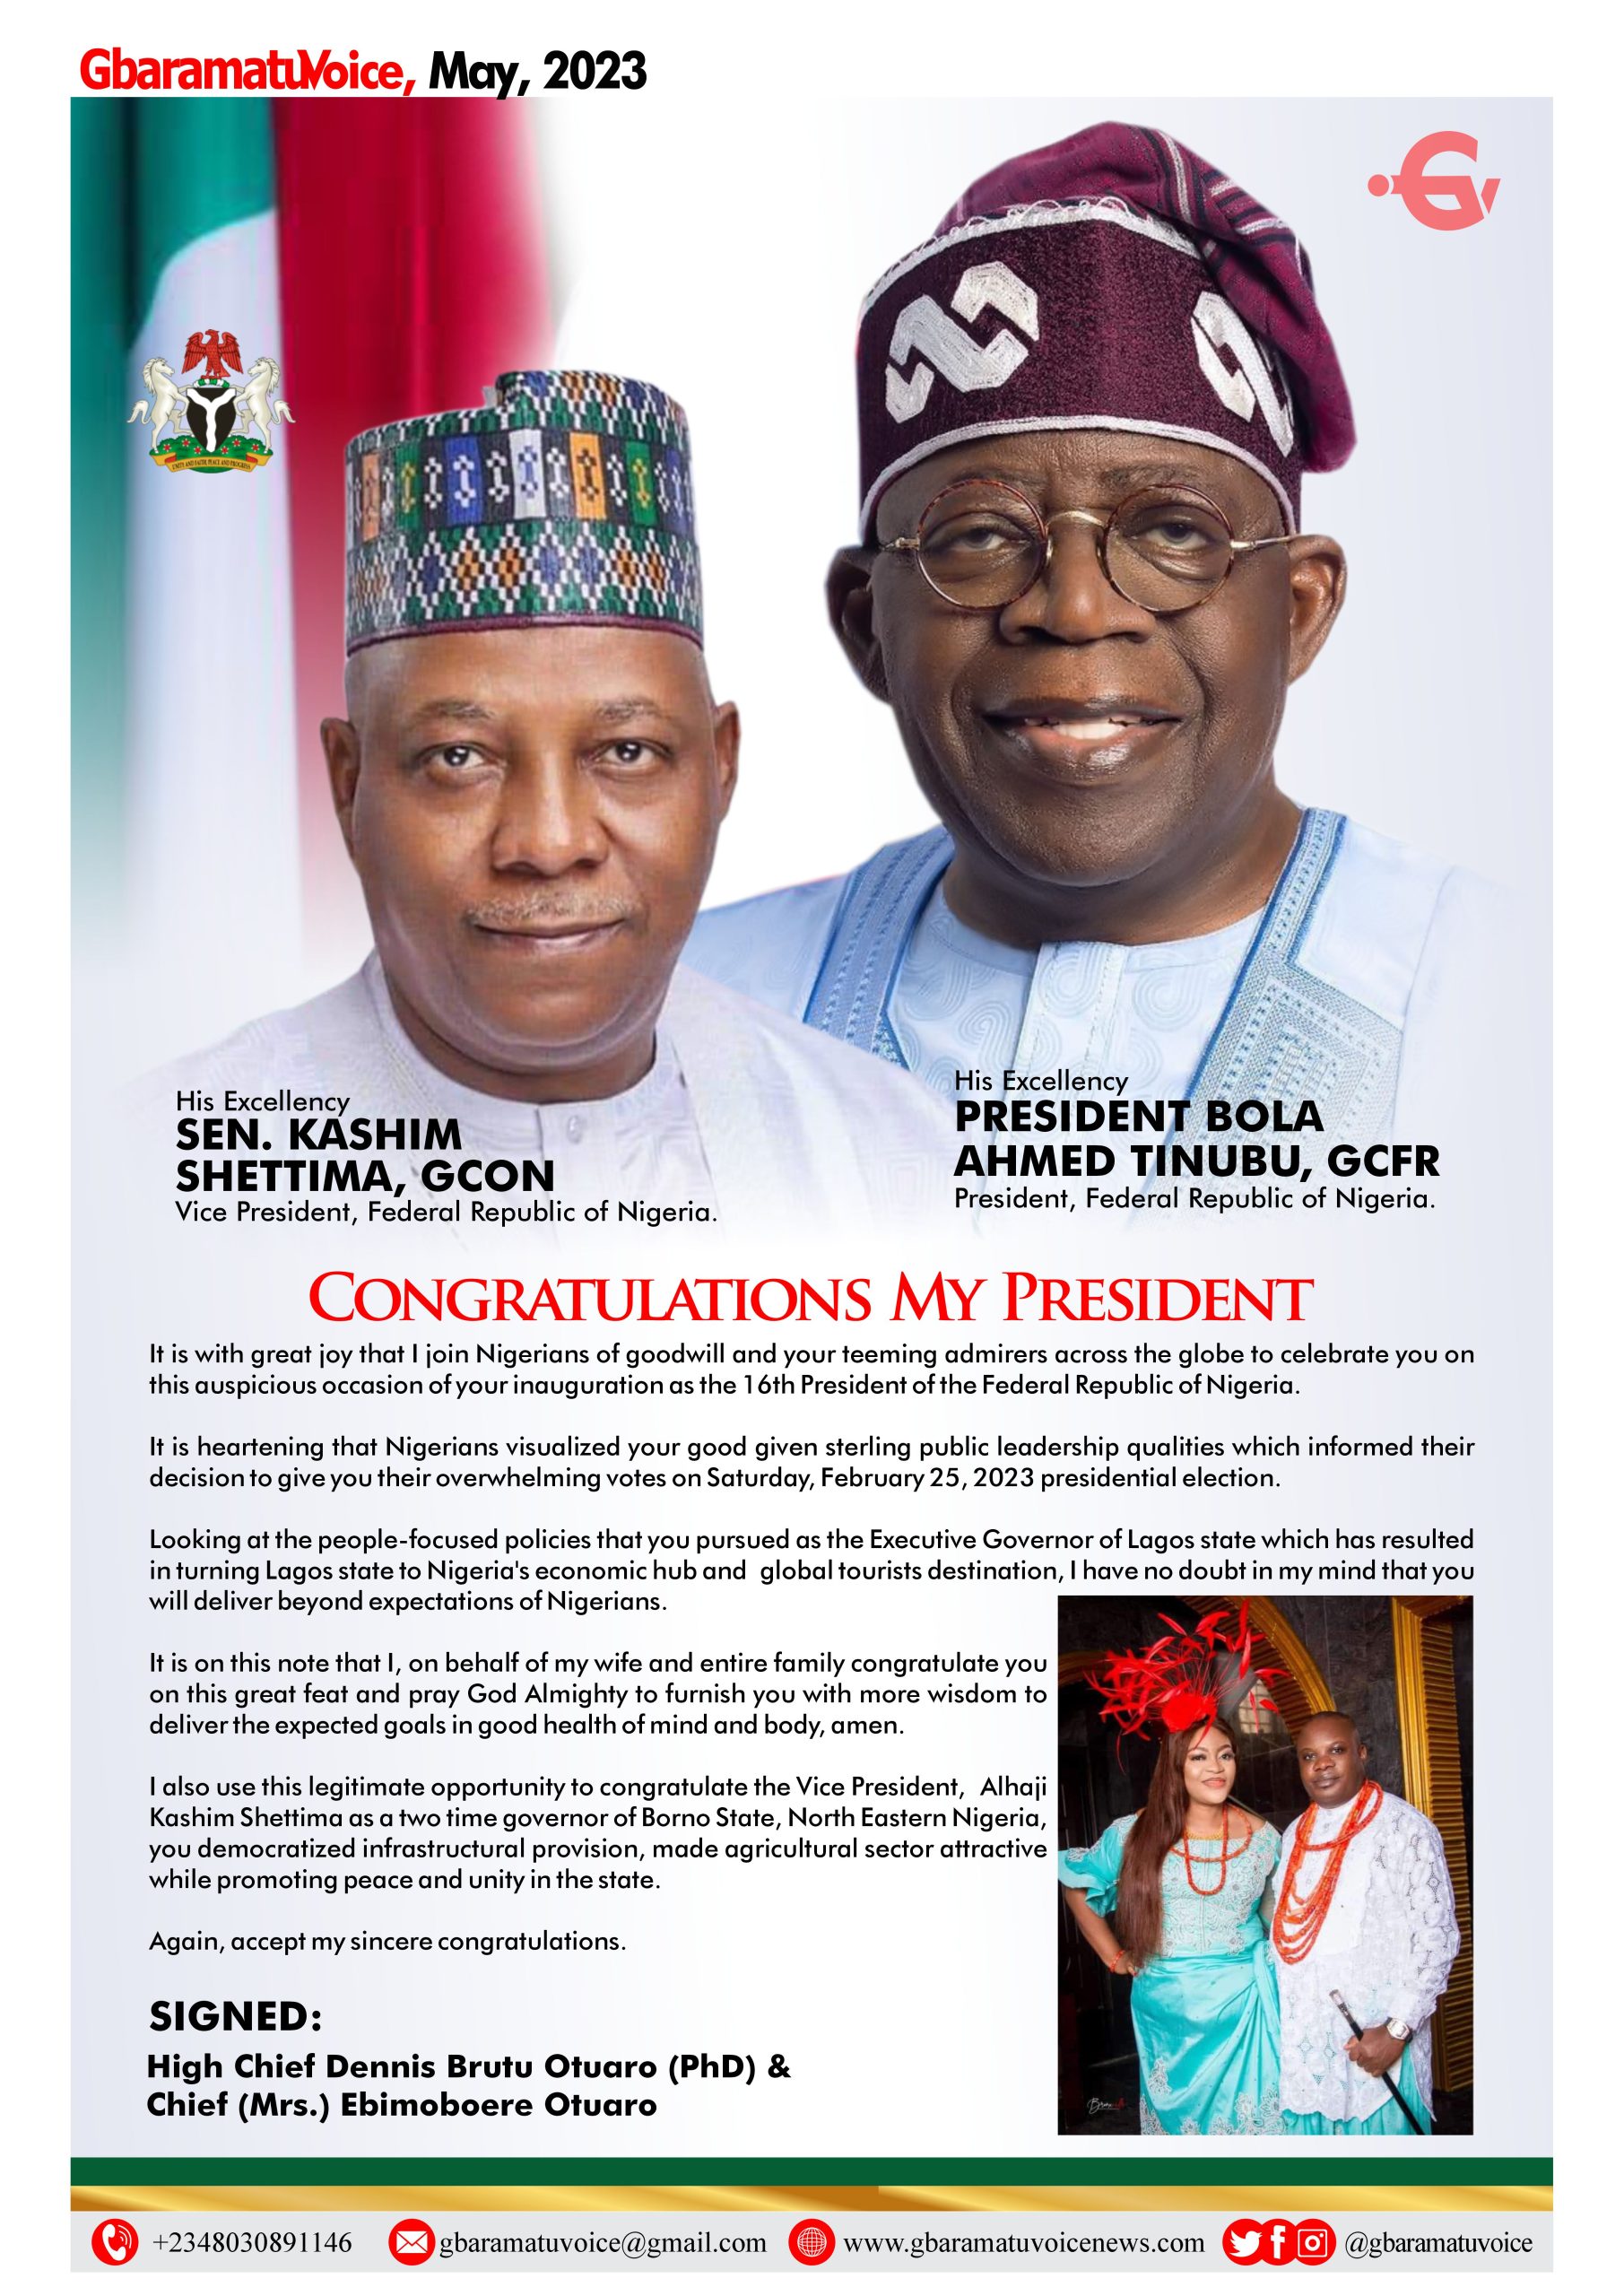 Otuaro sends congratulatory message to Tinubu, says president will deliver beyond expectations